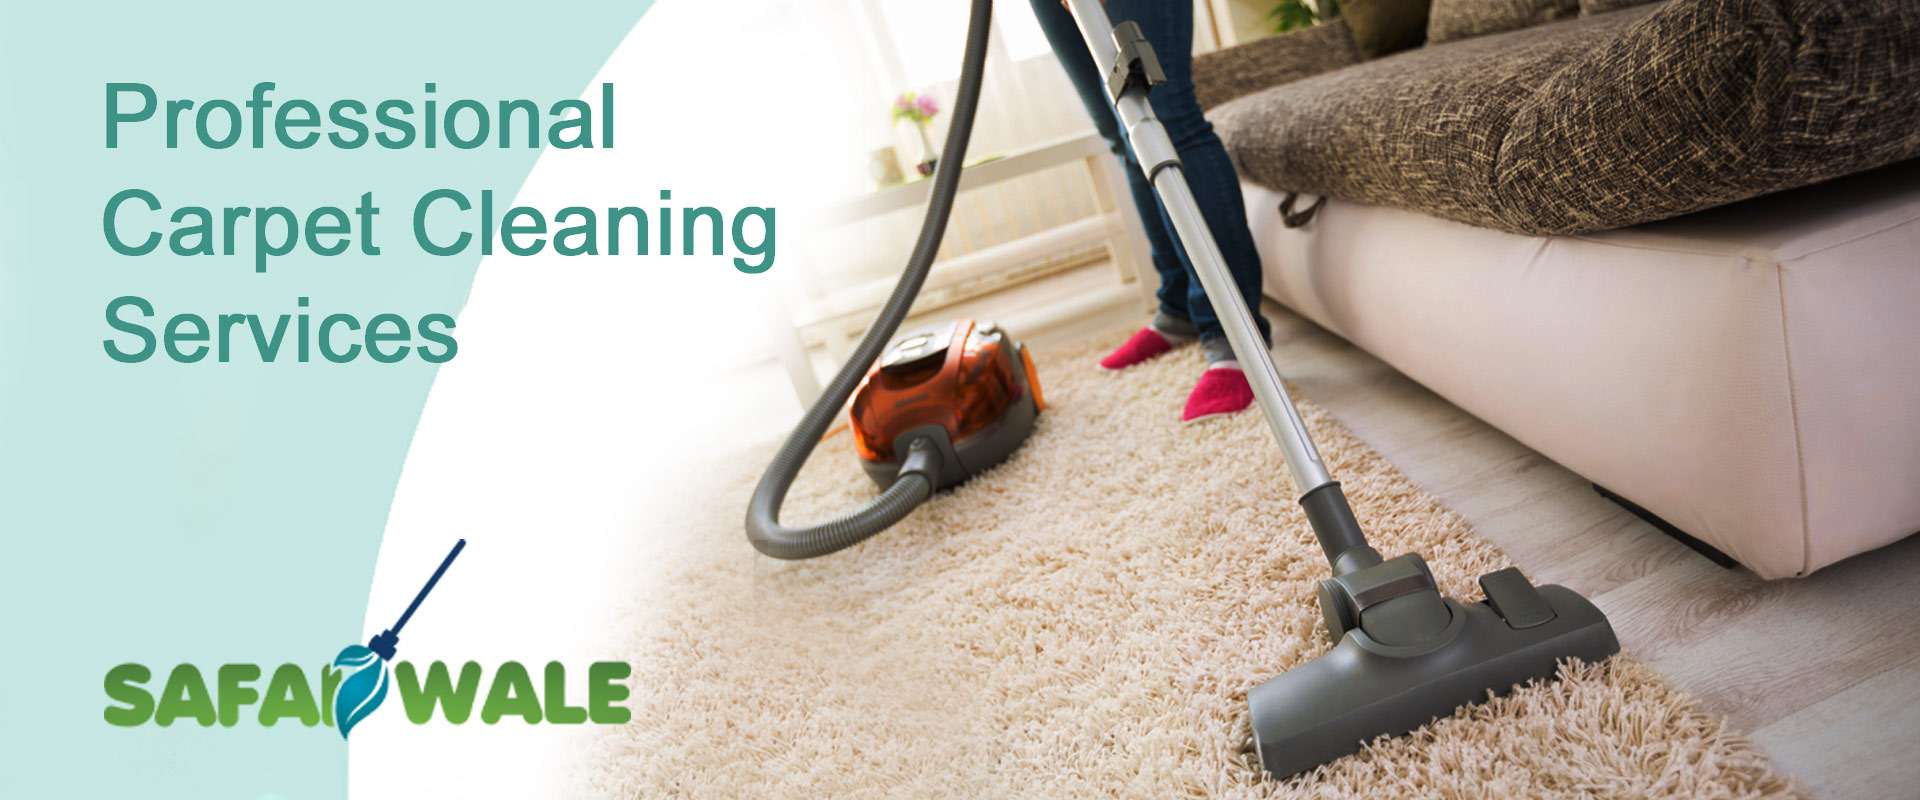 Carpet Cleaning Services In Badlapur, Thane